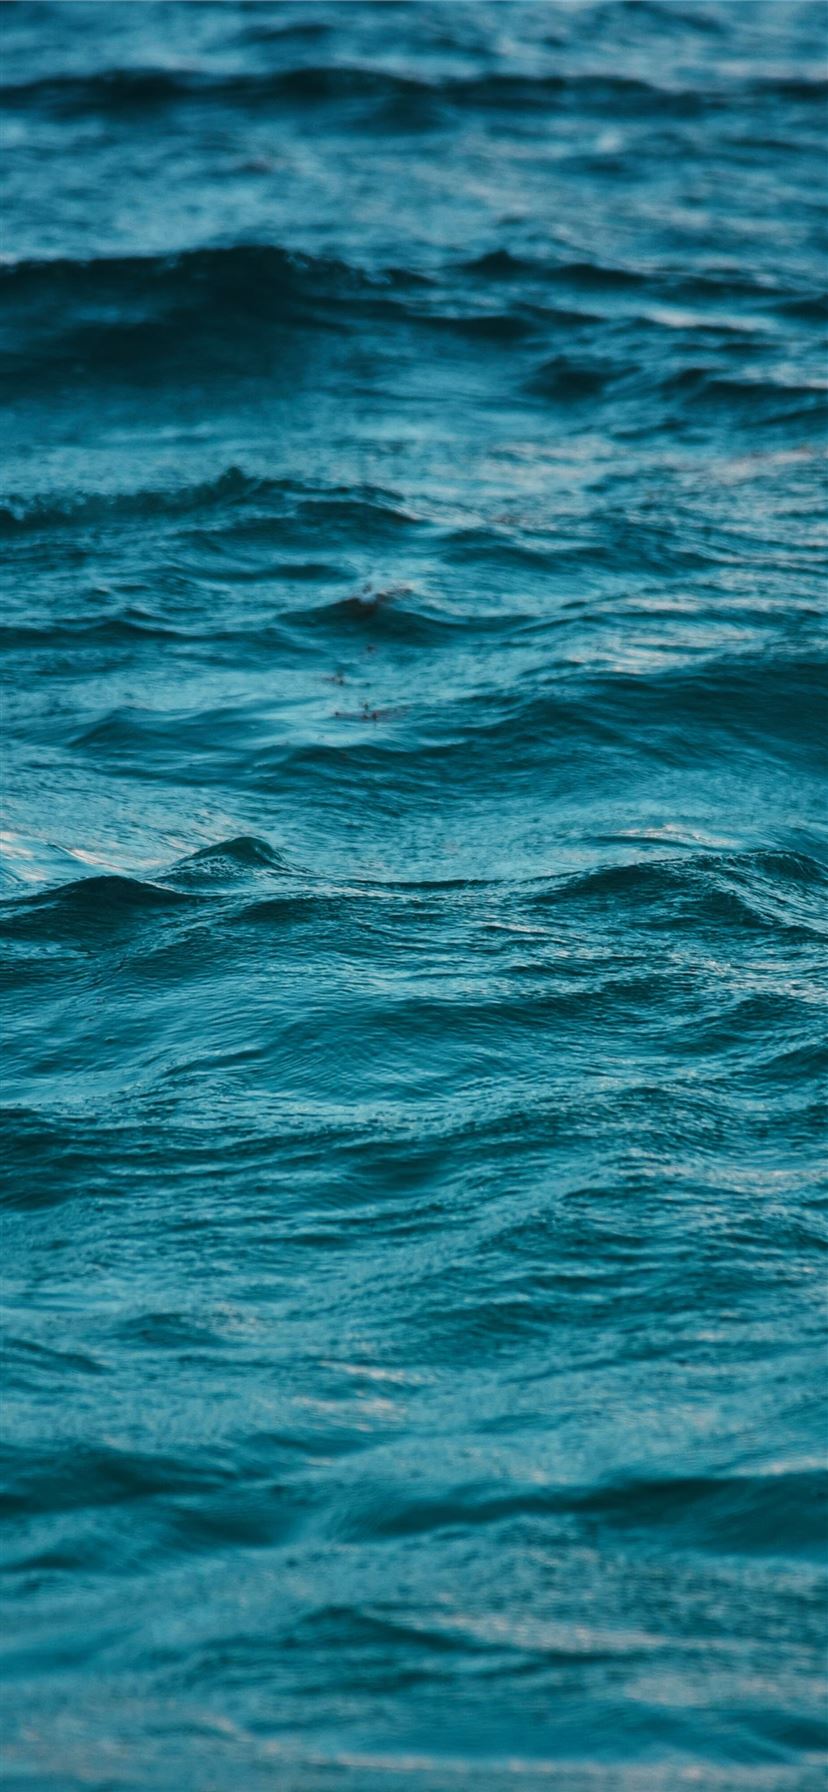 body of water during daytime iPhone 11 wallpaper 